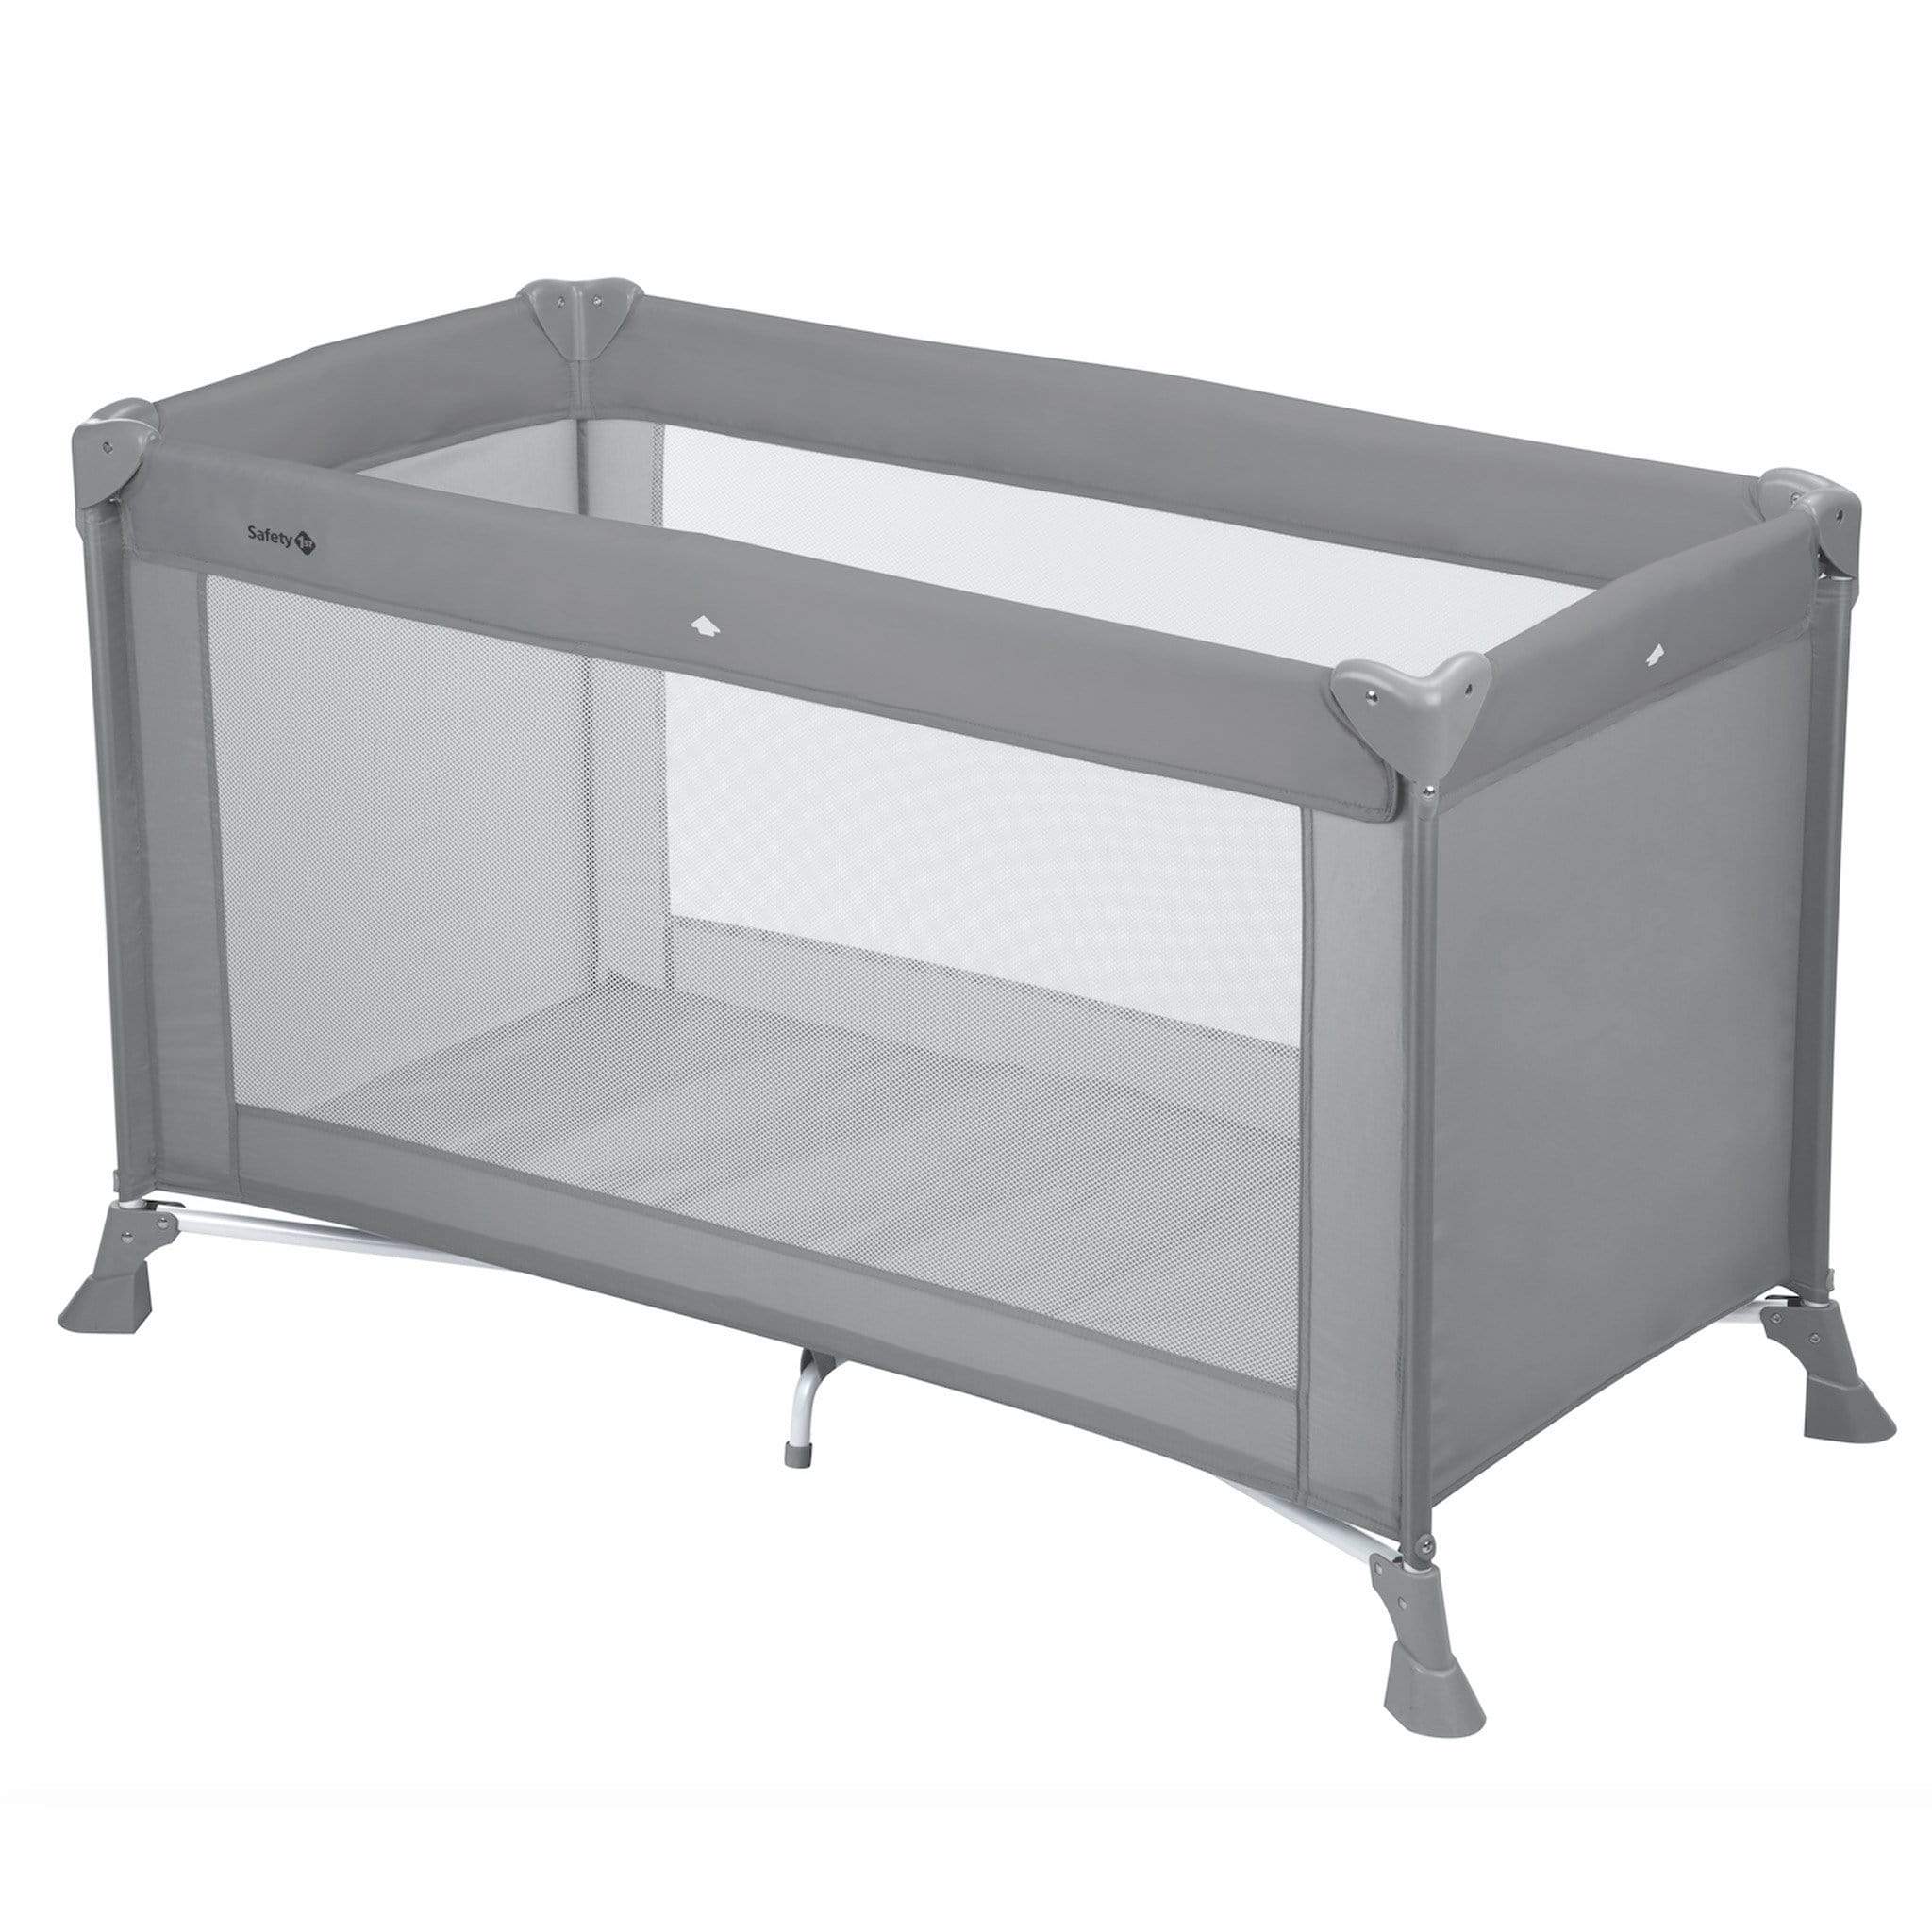 Safety 1st travel cots Safety 1st Soft Dreams Travel Cot 2114766300